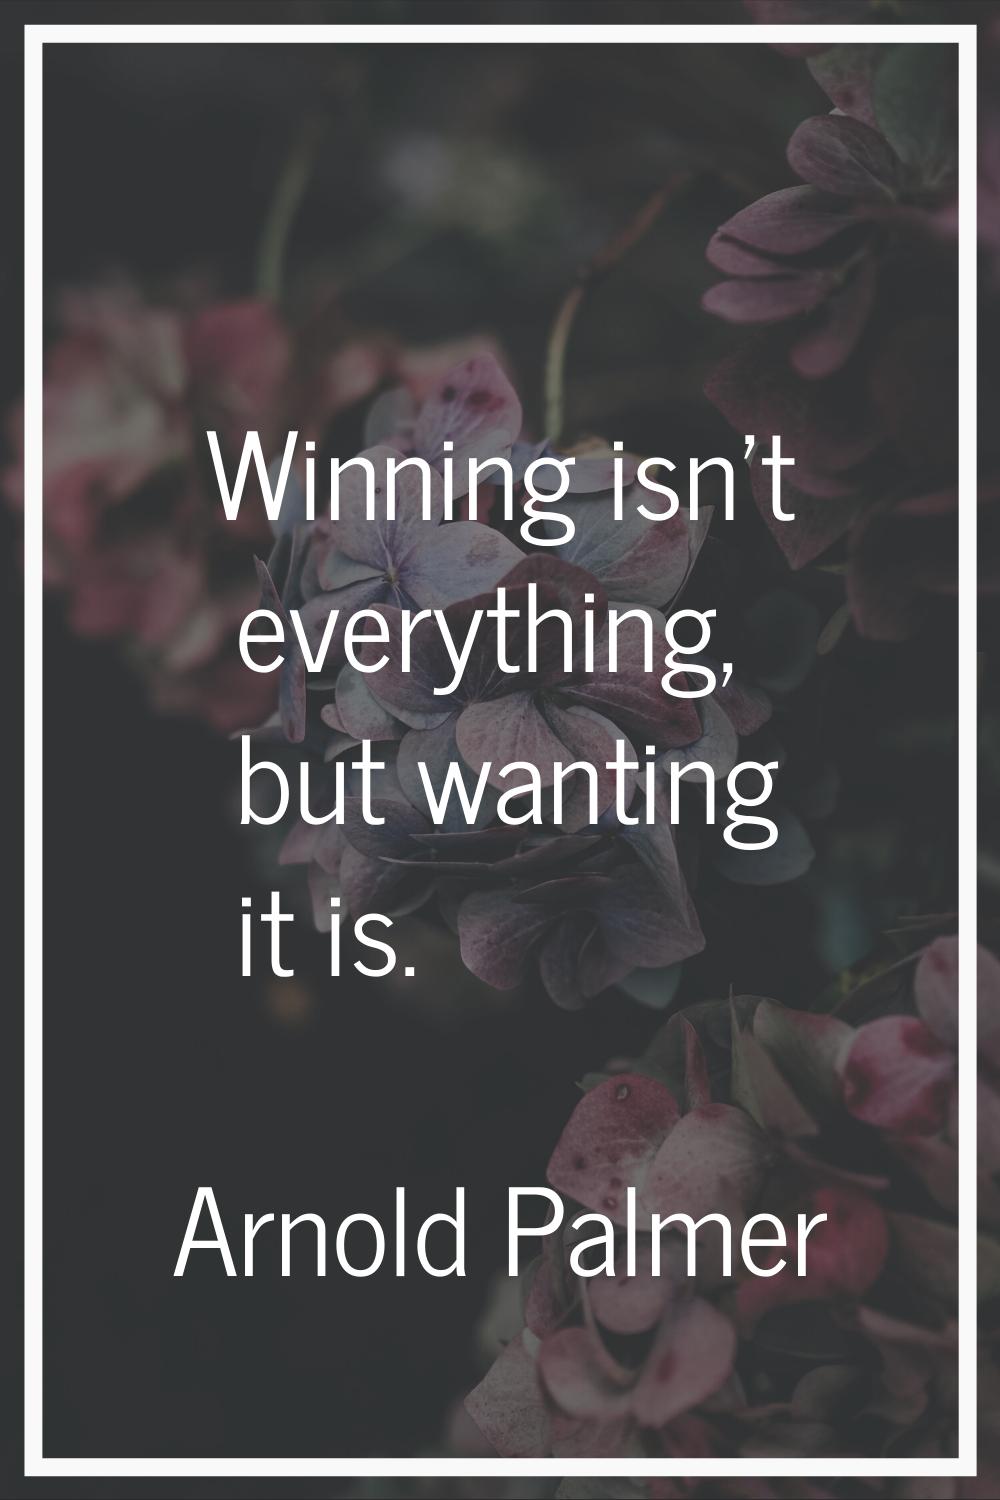 Winning isn't everything, but wanting it is.